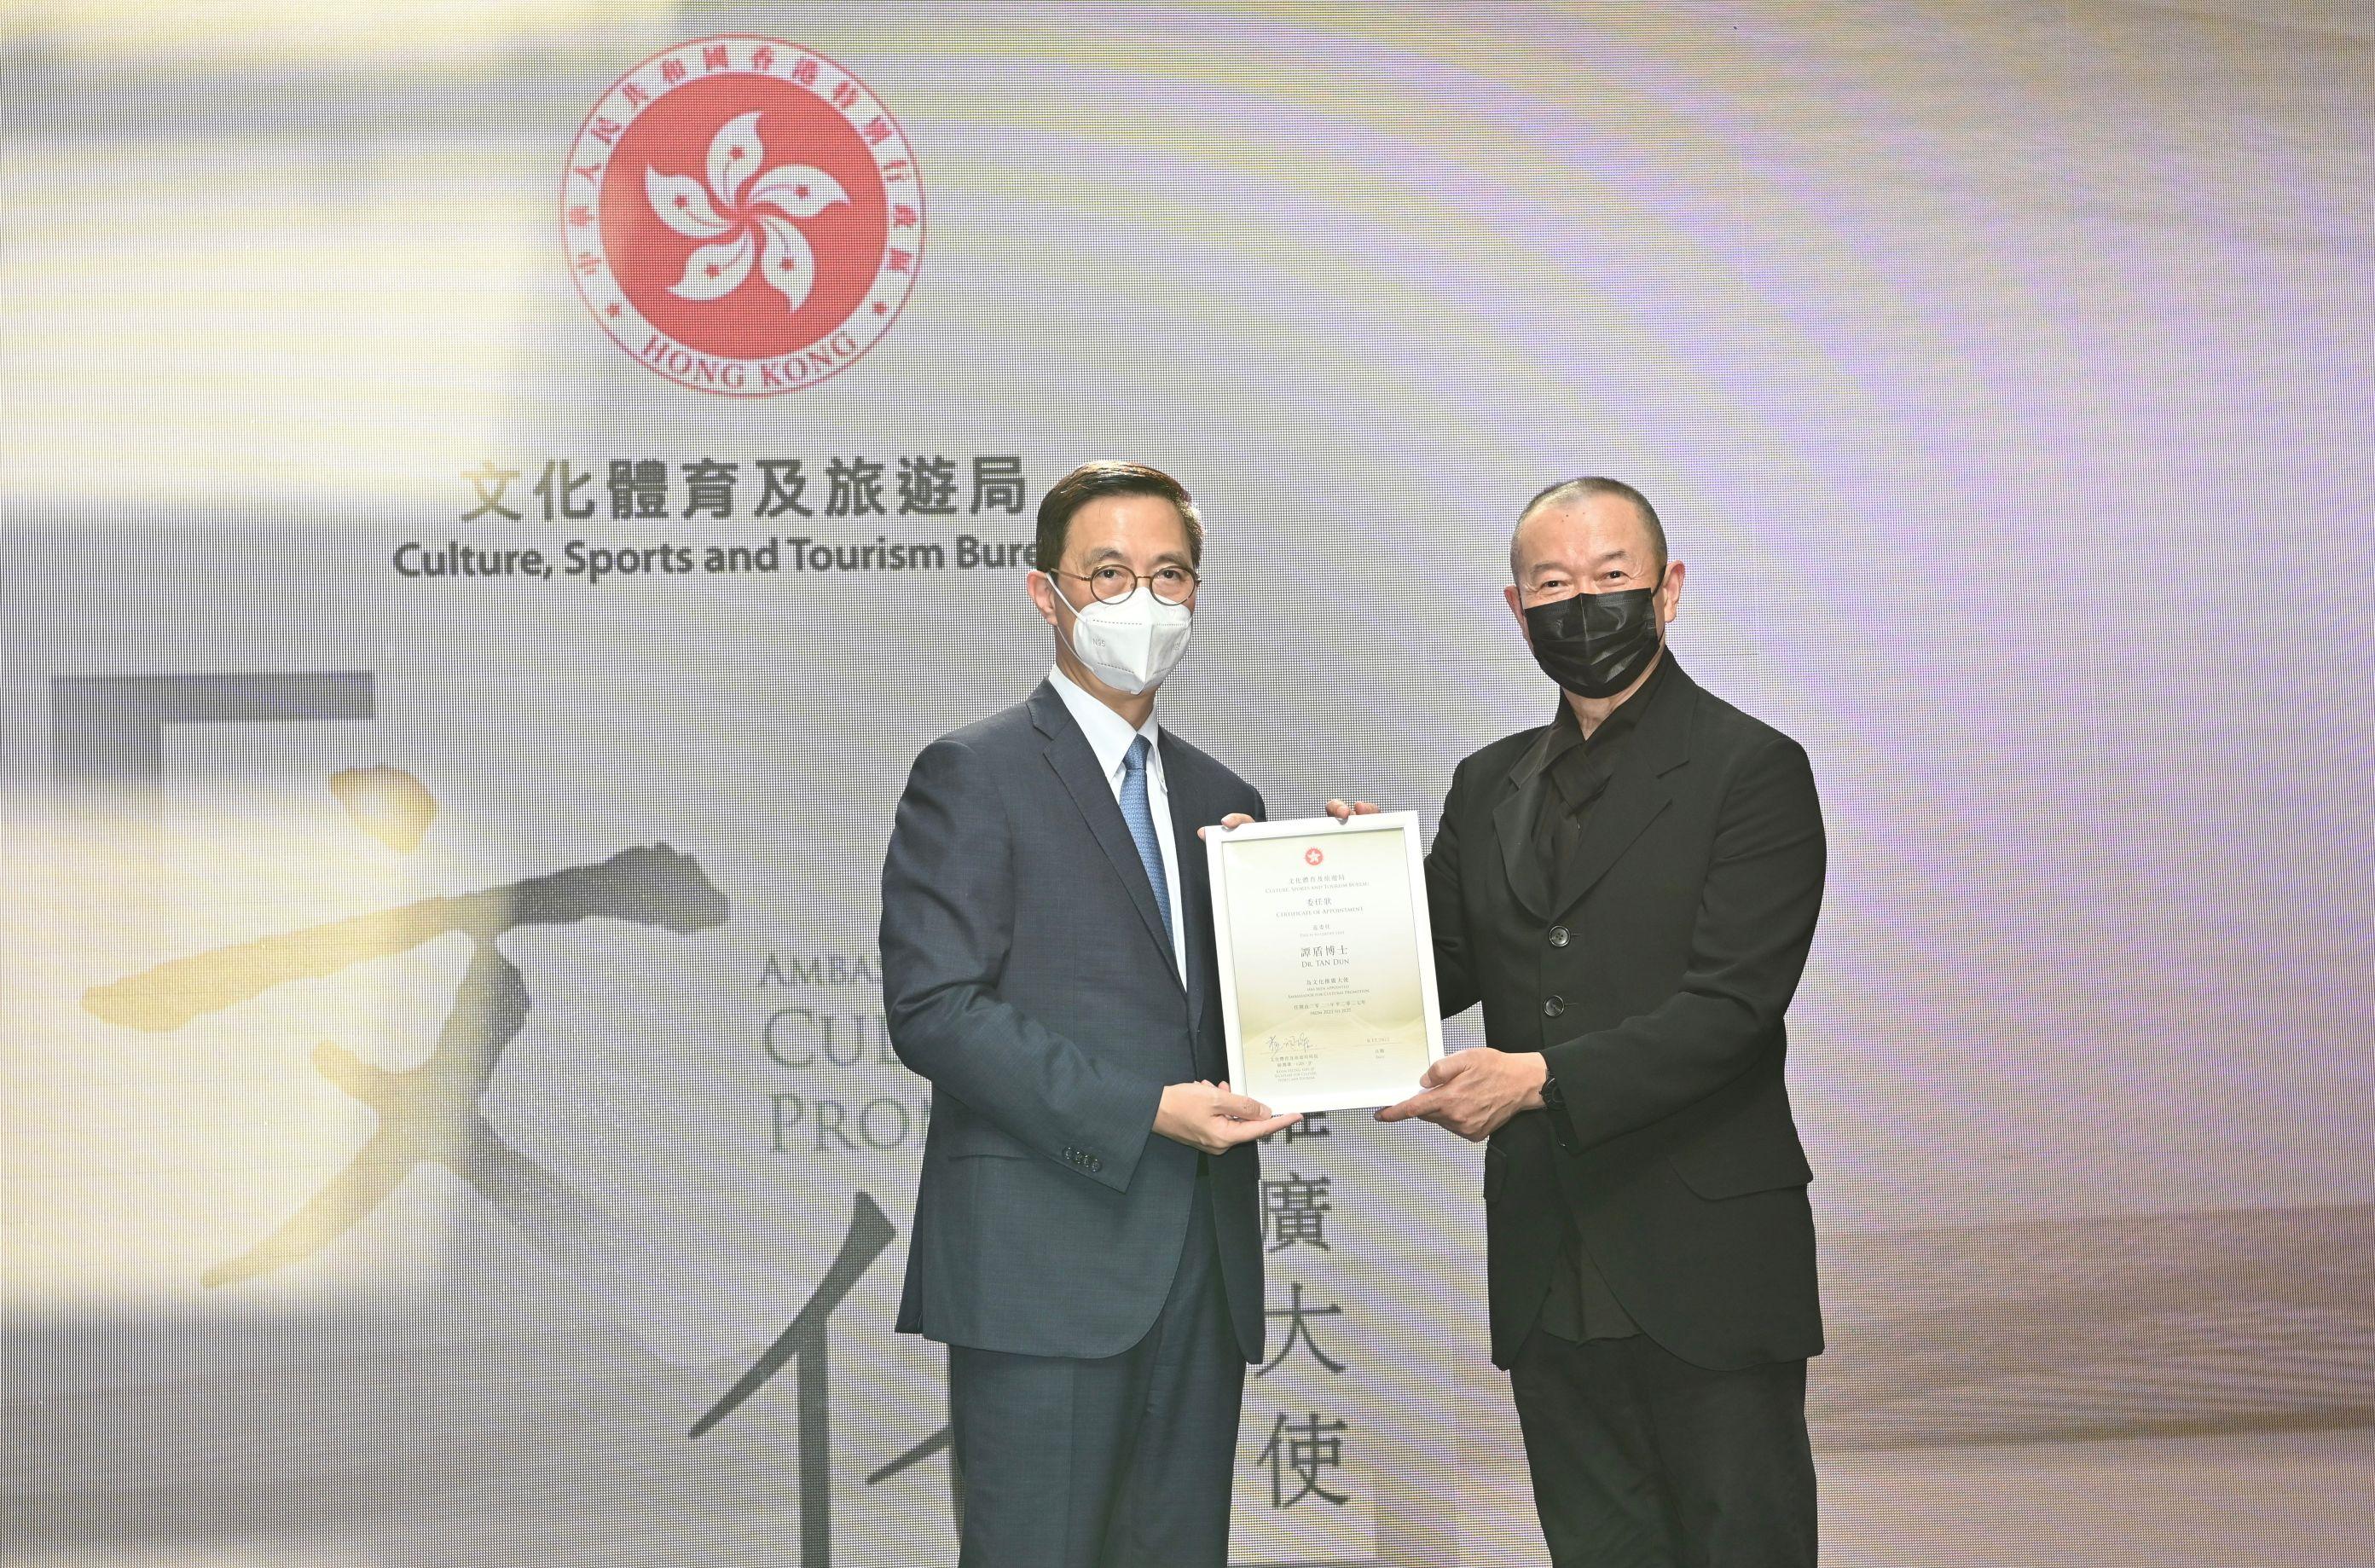 The Government announced today (December 8) that the Secretary for Culture, Sports and Tourism, Mr Kevin Yeung, has appointed Tan Dun as the Ambassador for Cultural Promotion. Photo shows Mr Yeung (left) presenting the certificate of appointment of "Ambassador for Cultural Promotion" to Tan (right).